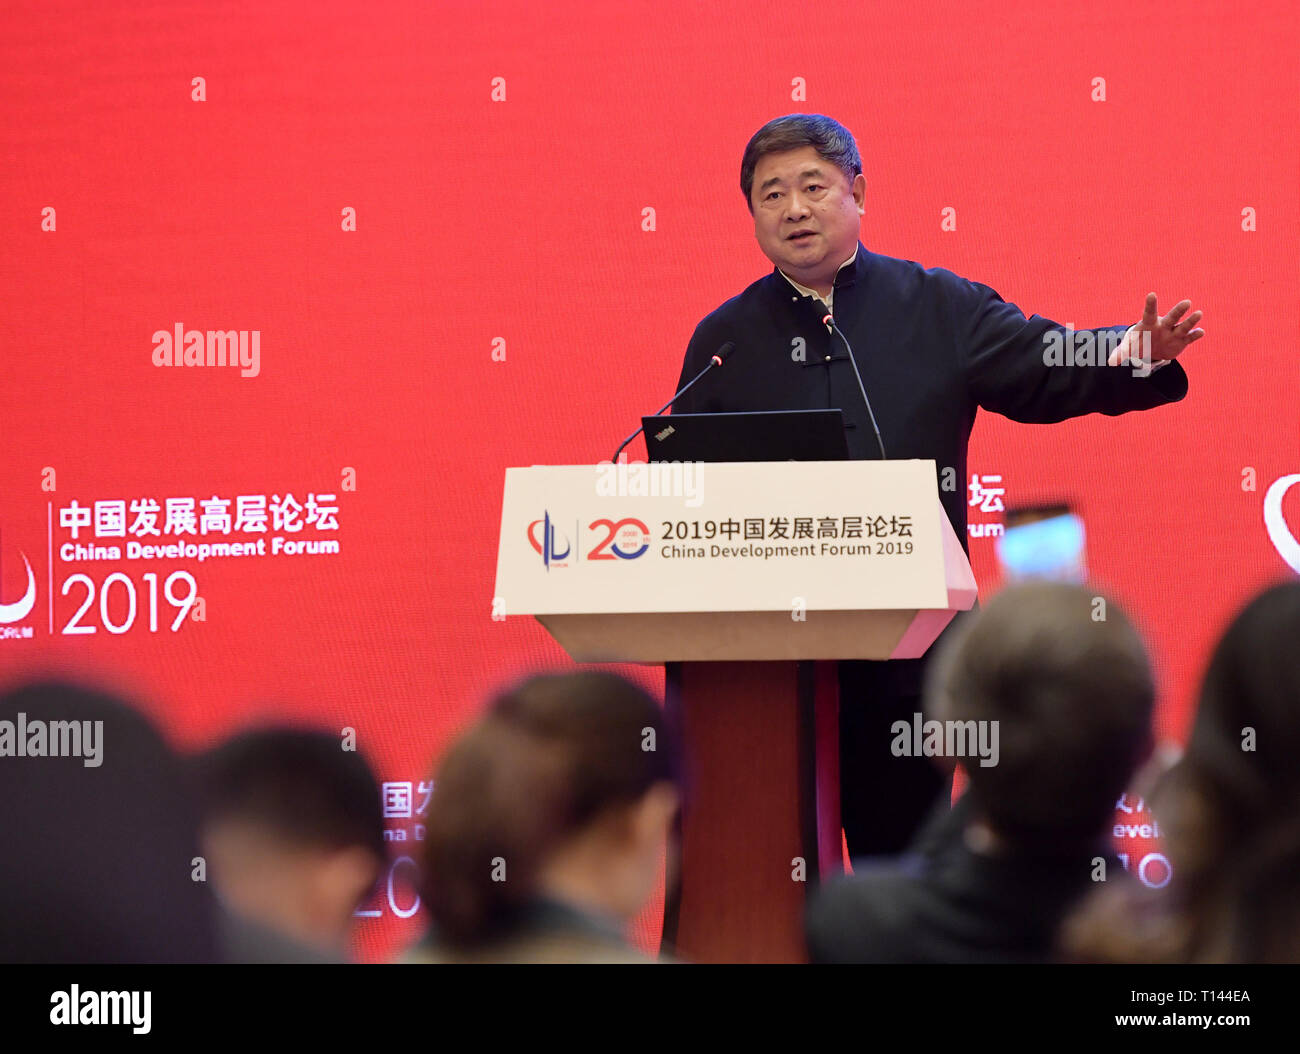 Beijing, China, 23rd march, 2019. (190323) -- BEIJING, March 23, 2019 (Xinhua) -- Shan Jixiang, curator of the Palace Museum, speaks at the Economic Summit of China Development Forum 2019 in Beijing, capital of China, March 23, 2019. The three-day China Development Forum, which kicked off Saturday, will focus on key issues such as the supply-side structural reform, new measures of proactive fiscal policy, and the opening-up of the financial sector and financial stability. Credit: Xinhua/Alamy Live News Stock Photo